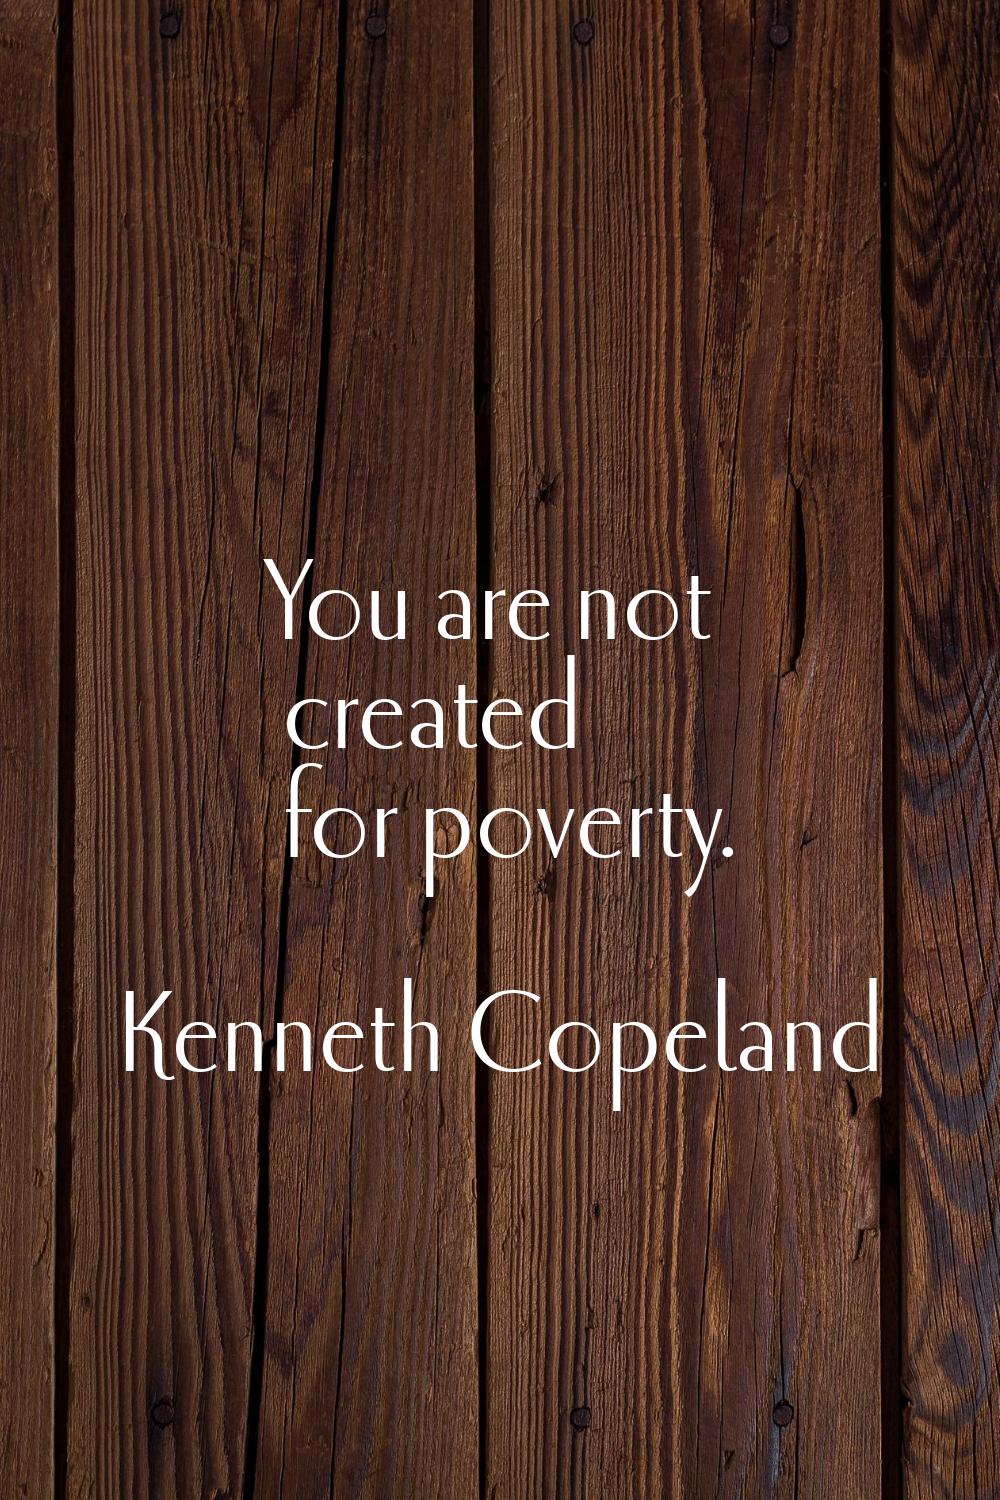 You are not created for poverty.